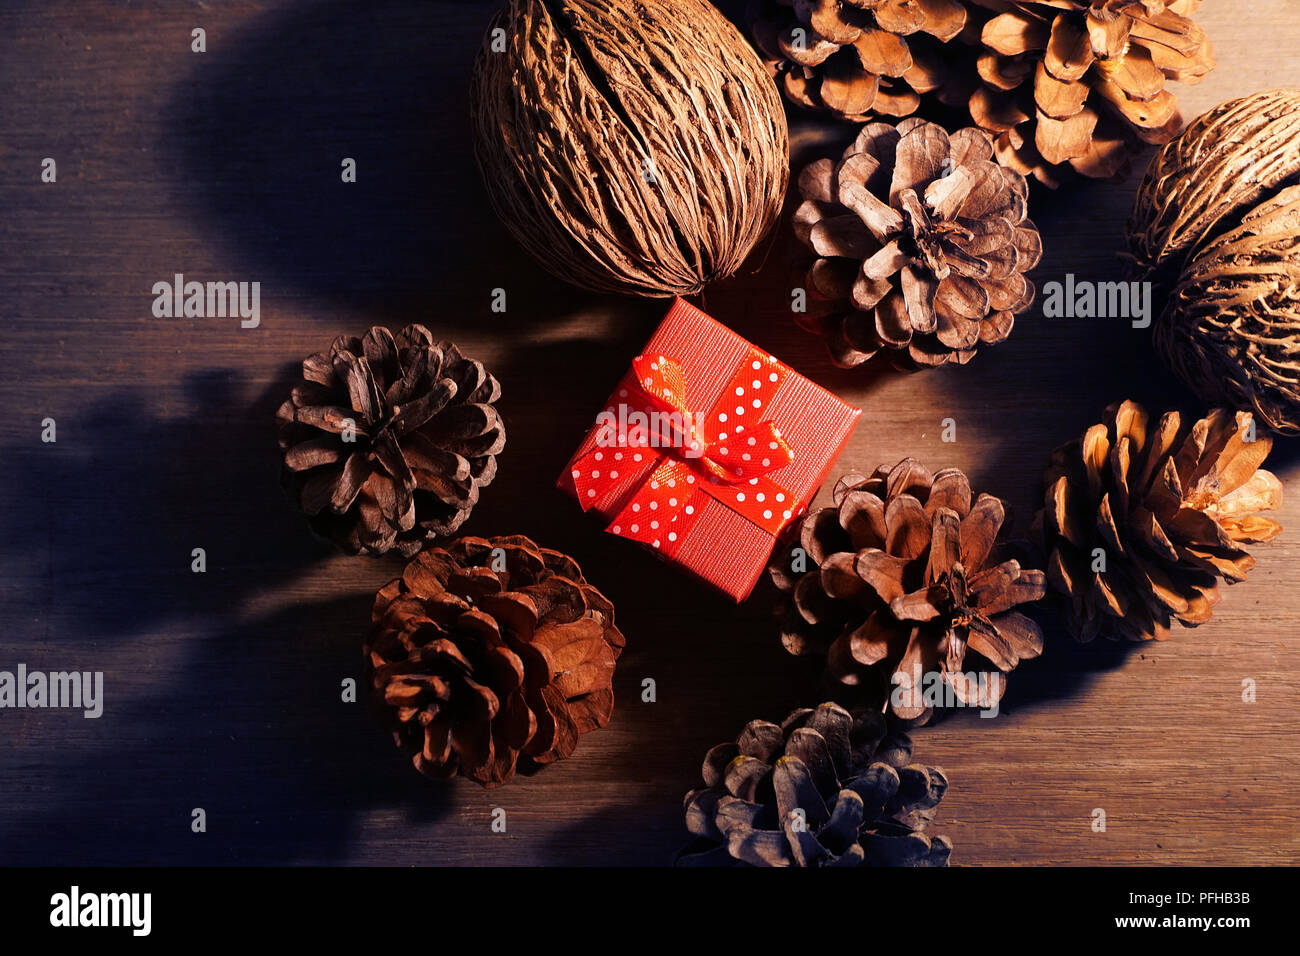 Topview red gift box on the center with group of pine cones. Stock Photo